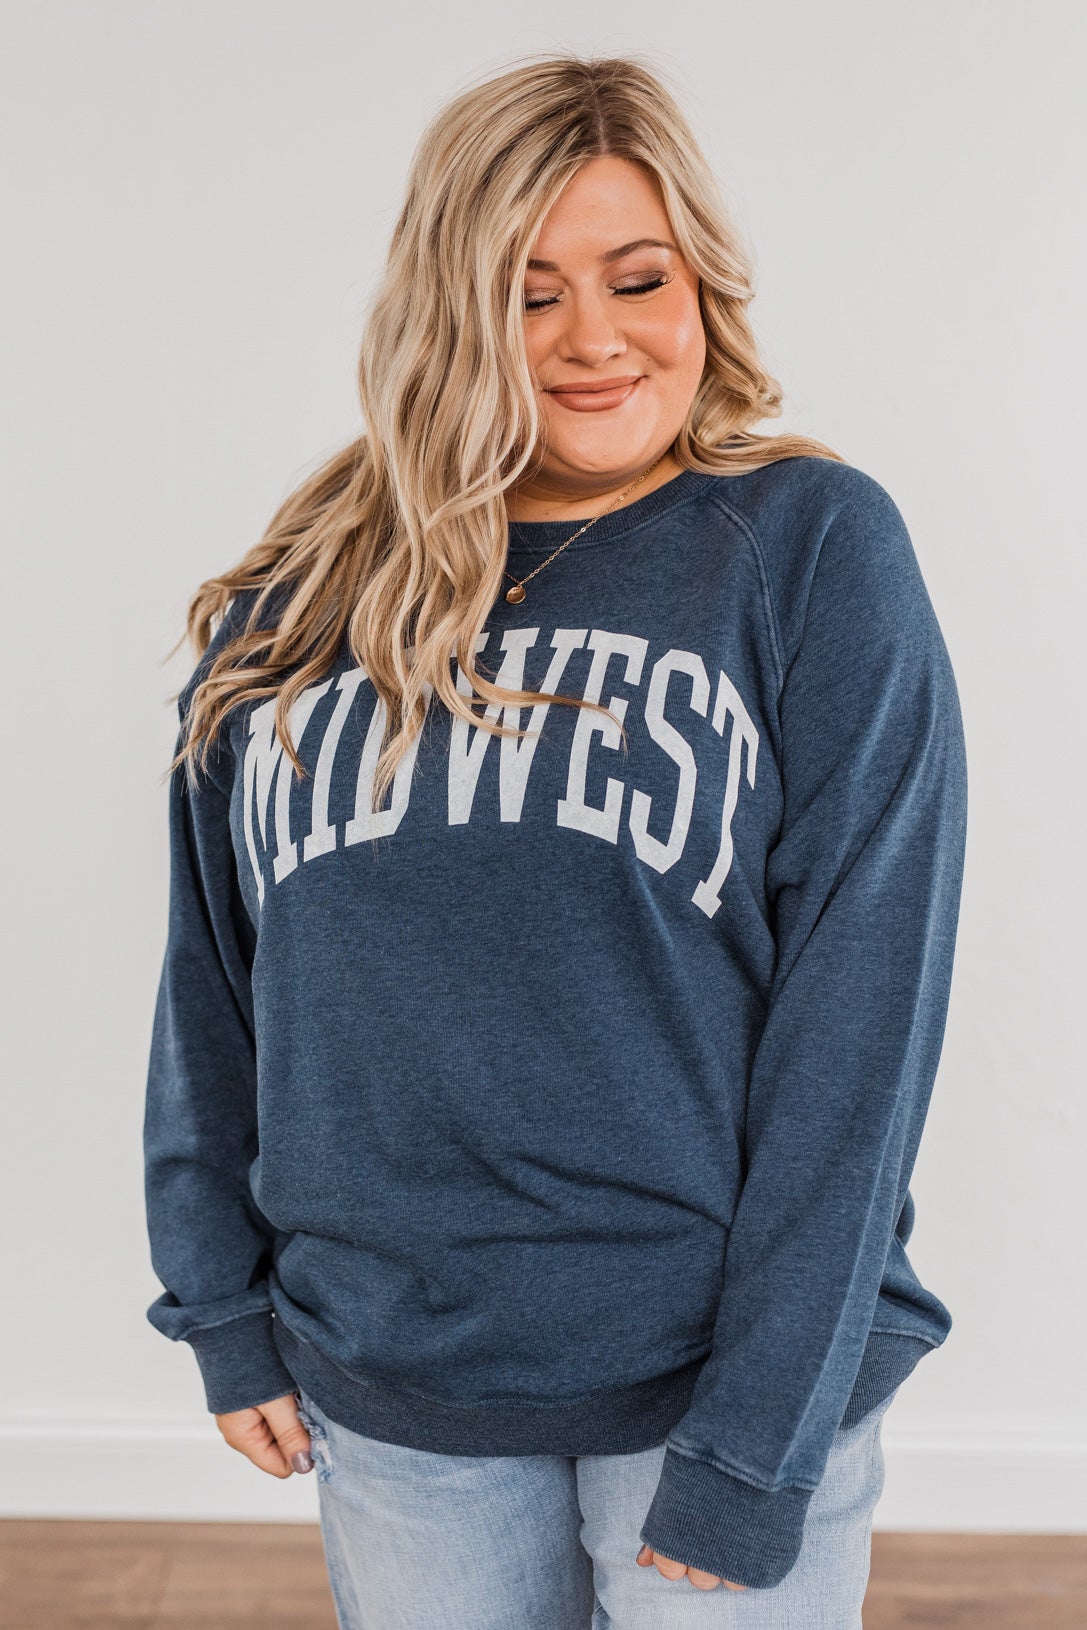 Thread & Supply "Midwest" Crew Neck Pullover- Blue